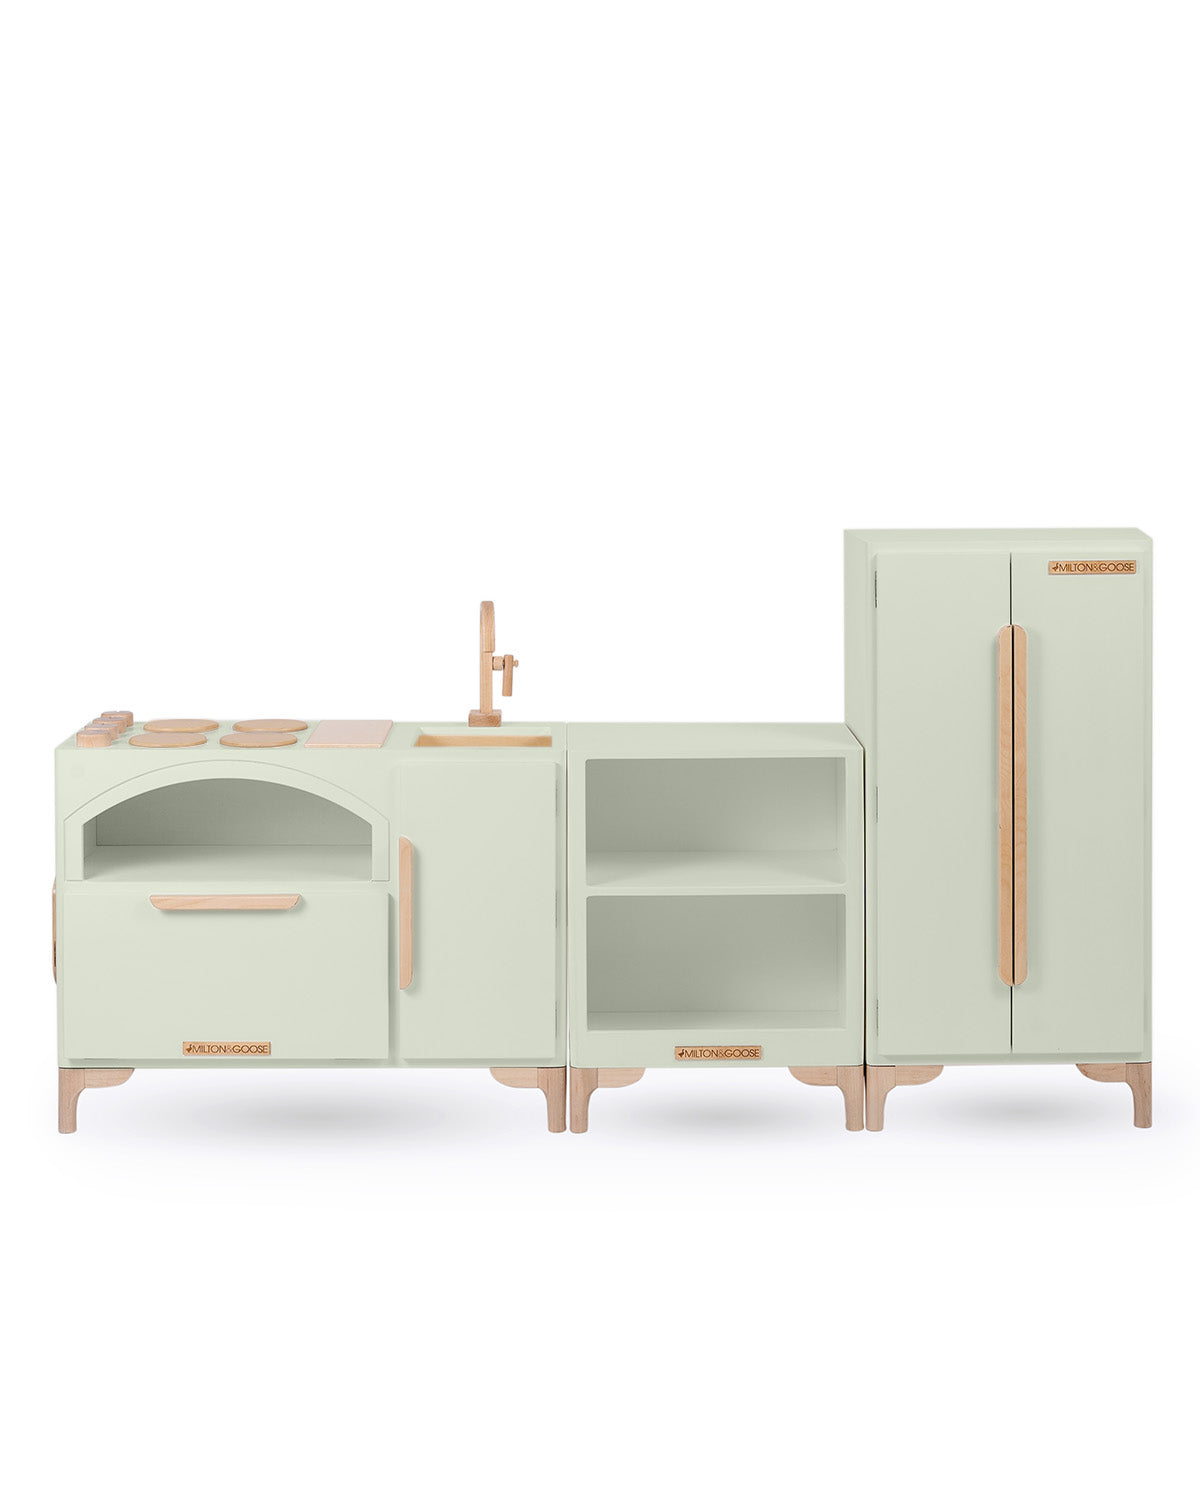 Milton & Goose Luca Play Kitchen collection in light sage. Collection includes the Play Kitchen with pizza paddle, Countertop, and play refrigerator.